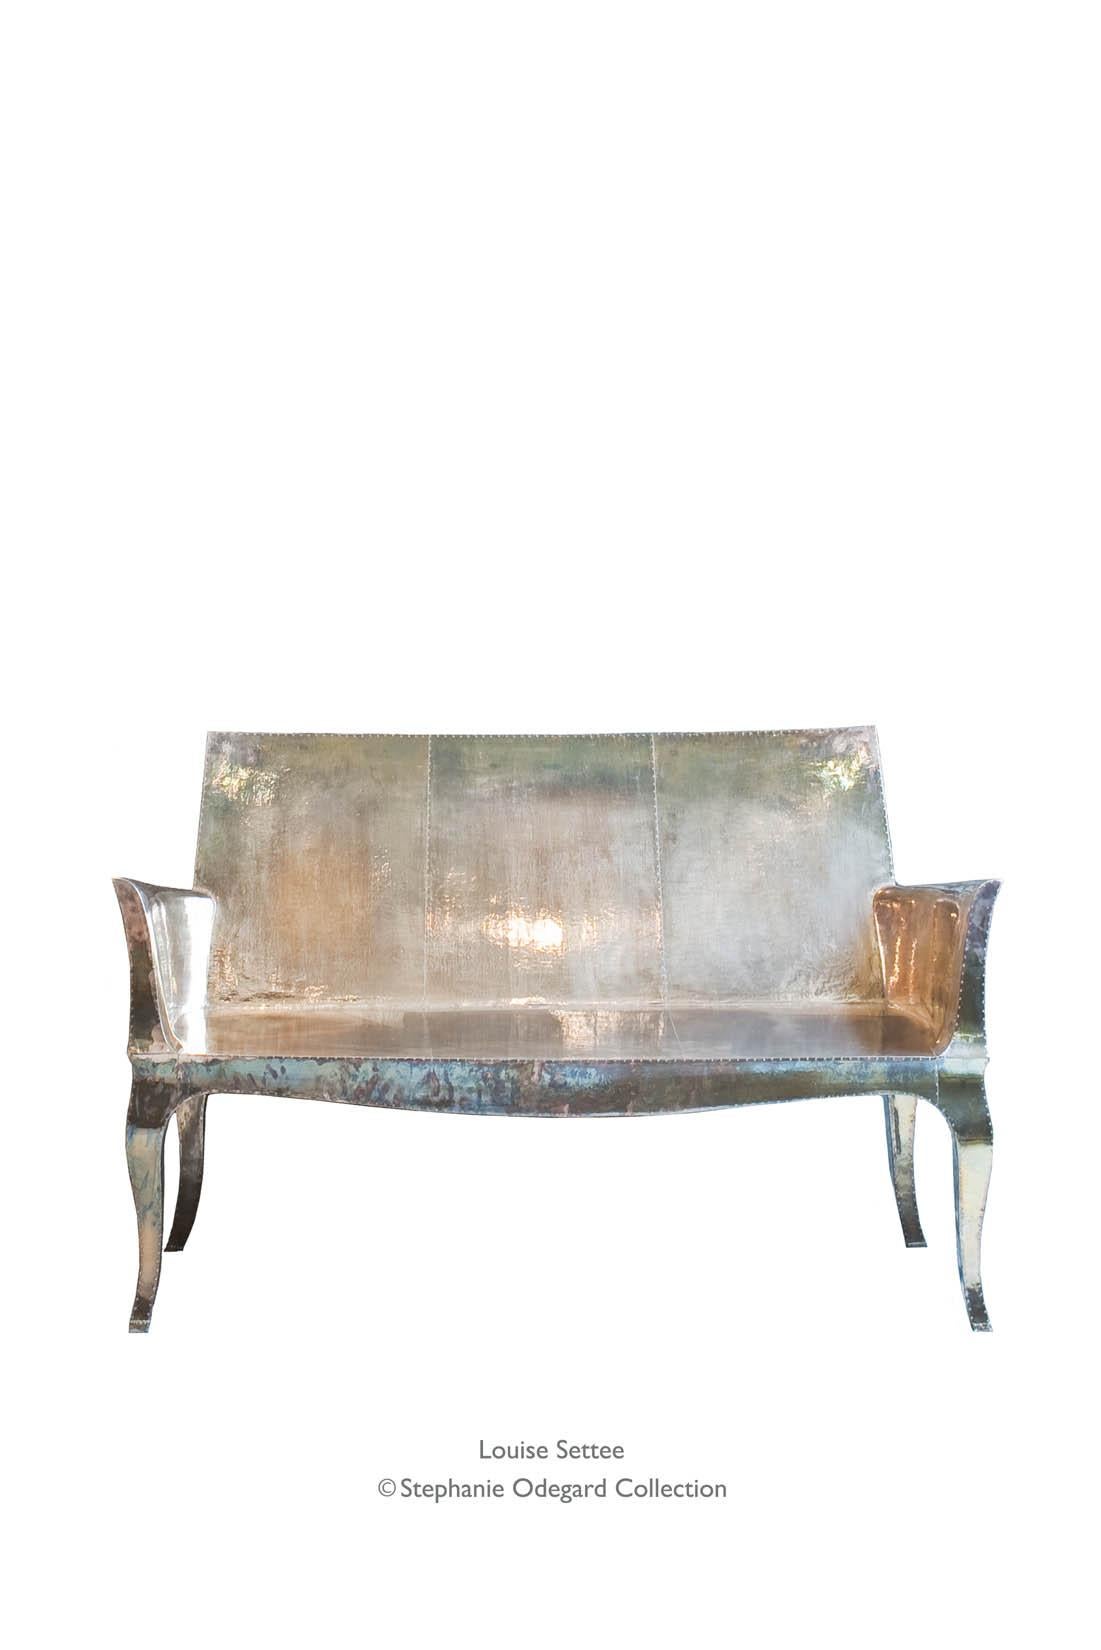 Louise Settee Art Deco Benches in Mid. Hammered Copper by Paul Mathieu For Sale 6